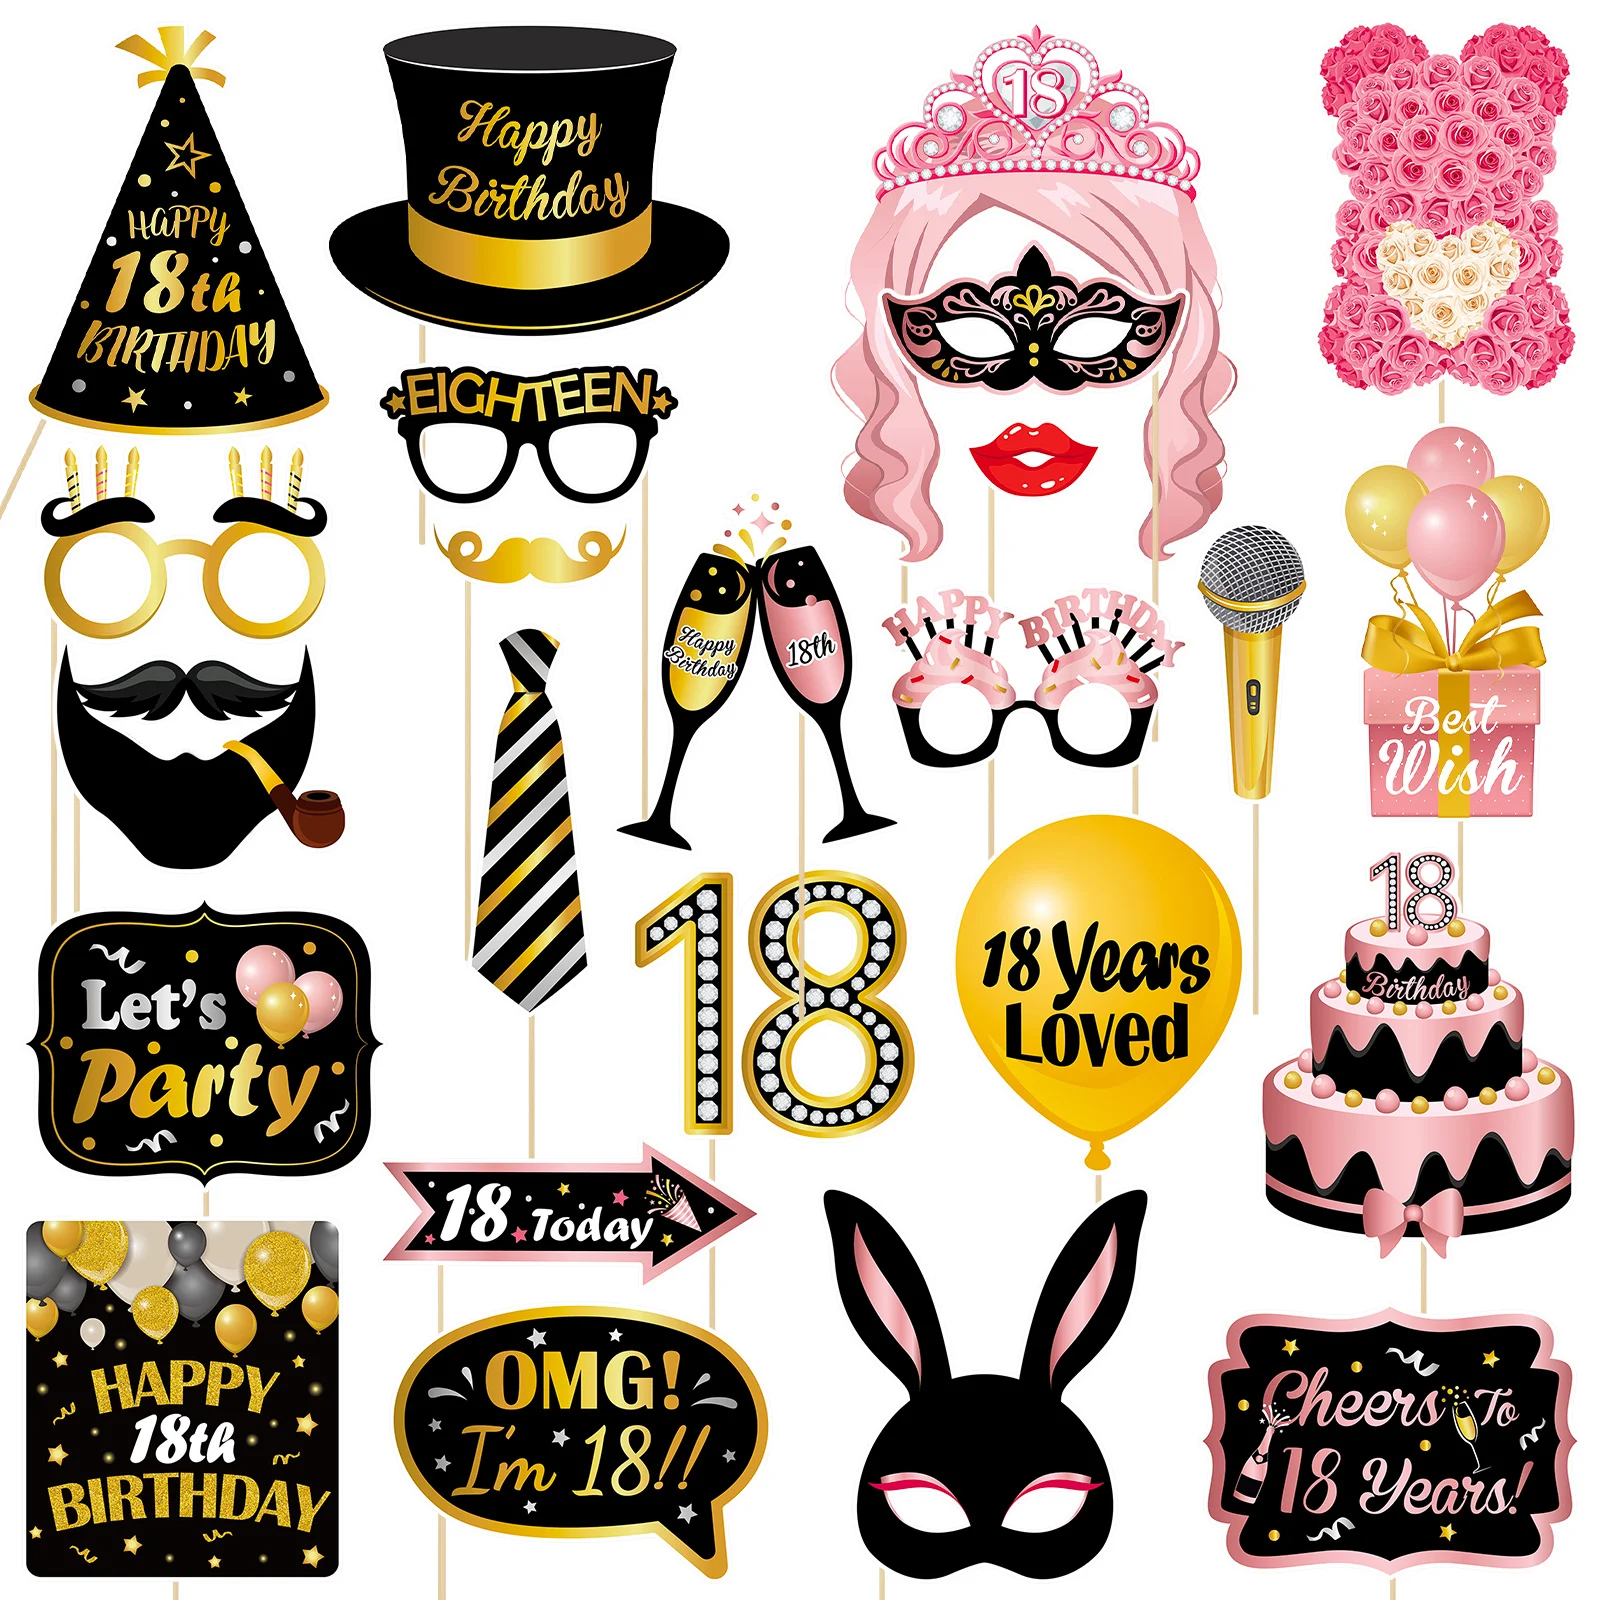 

24pcs 18th Birthday Photo Booth Props Photo Props Already Assembled Decoration DIY Selfie Favor Supplies